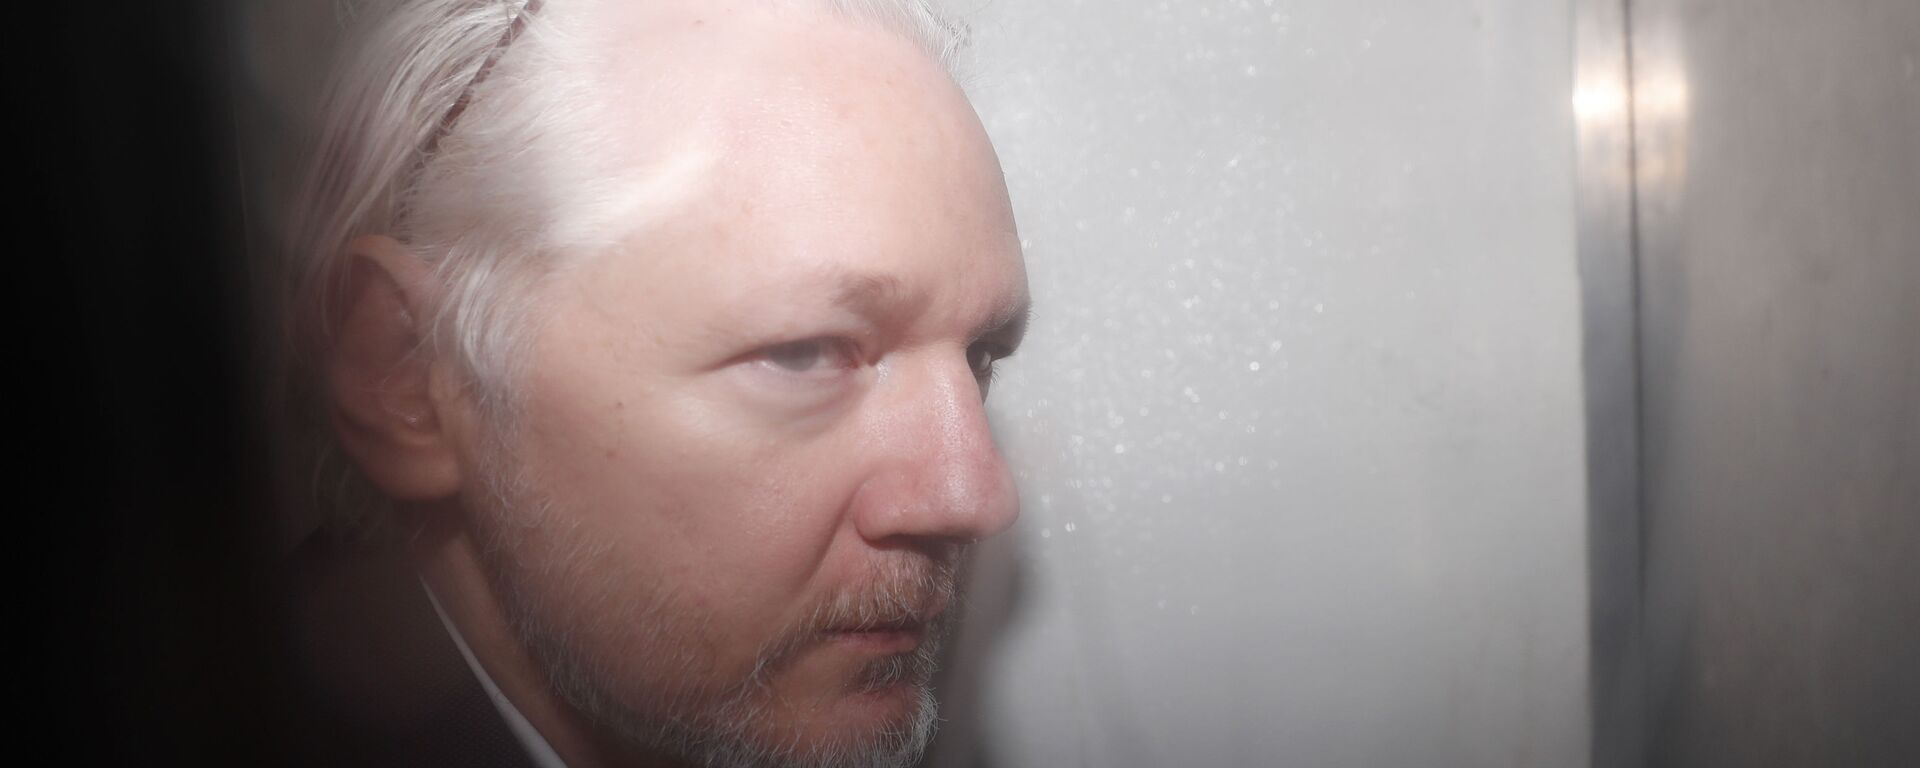 WikiLeaks founder Julian Assange is seen in a prison van traveling to Westminster Magistrates Court in London, Friday, Dec. 20, 2019. Assange is expected to appear in person before Westminster Magistrates in a private hearing related to a Spanish criminal case about alleged surveillance at the Ecuador embassy - Sputnik International, 1920, 13.12.2022